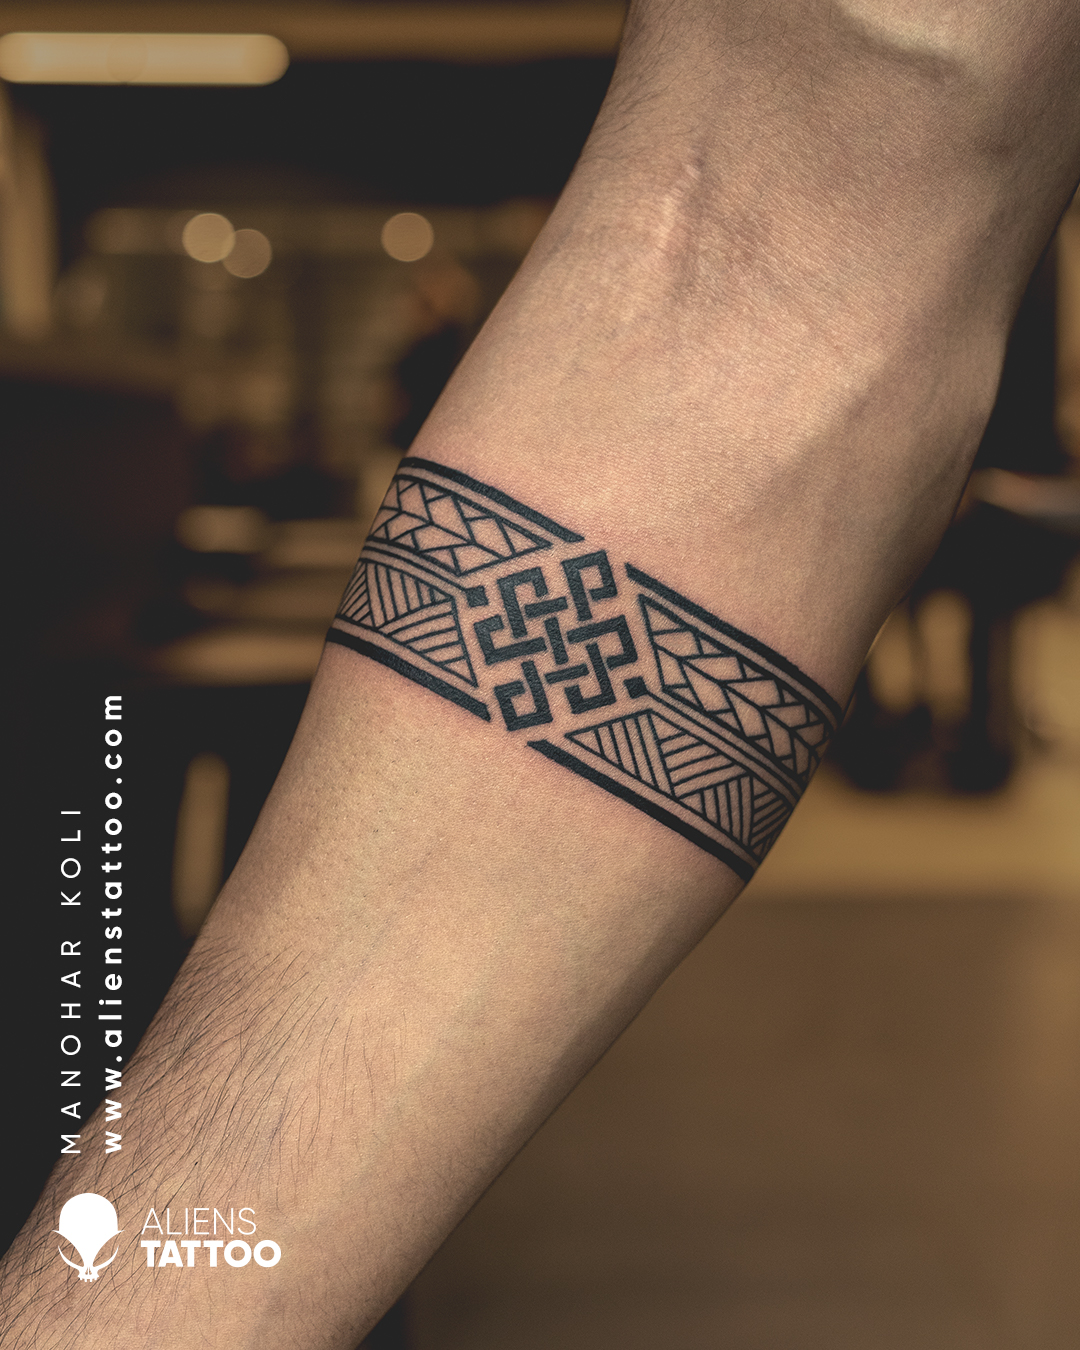 Arm Band Tattoo by Javagreeen on DeviantArt